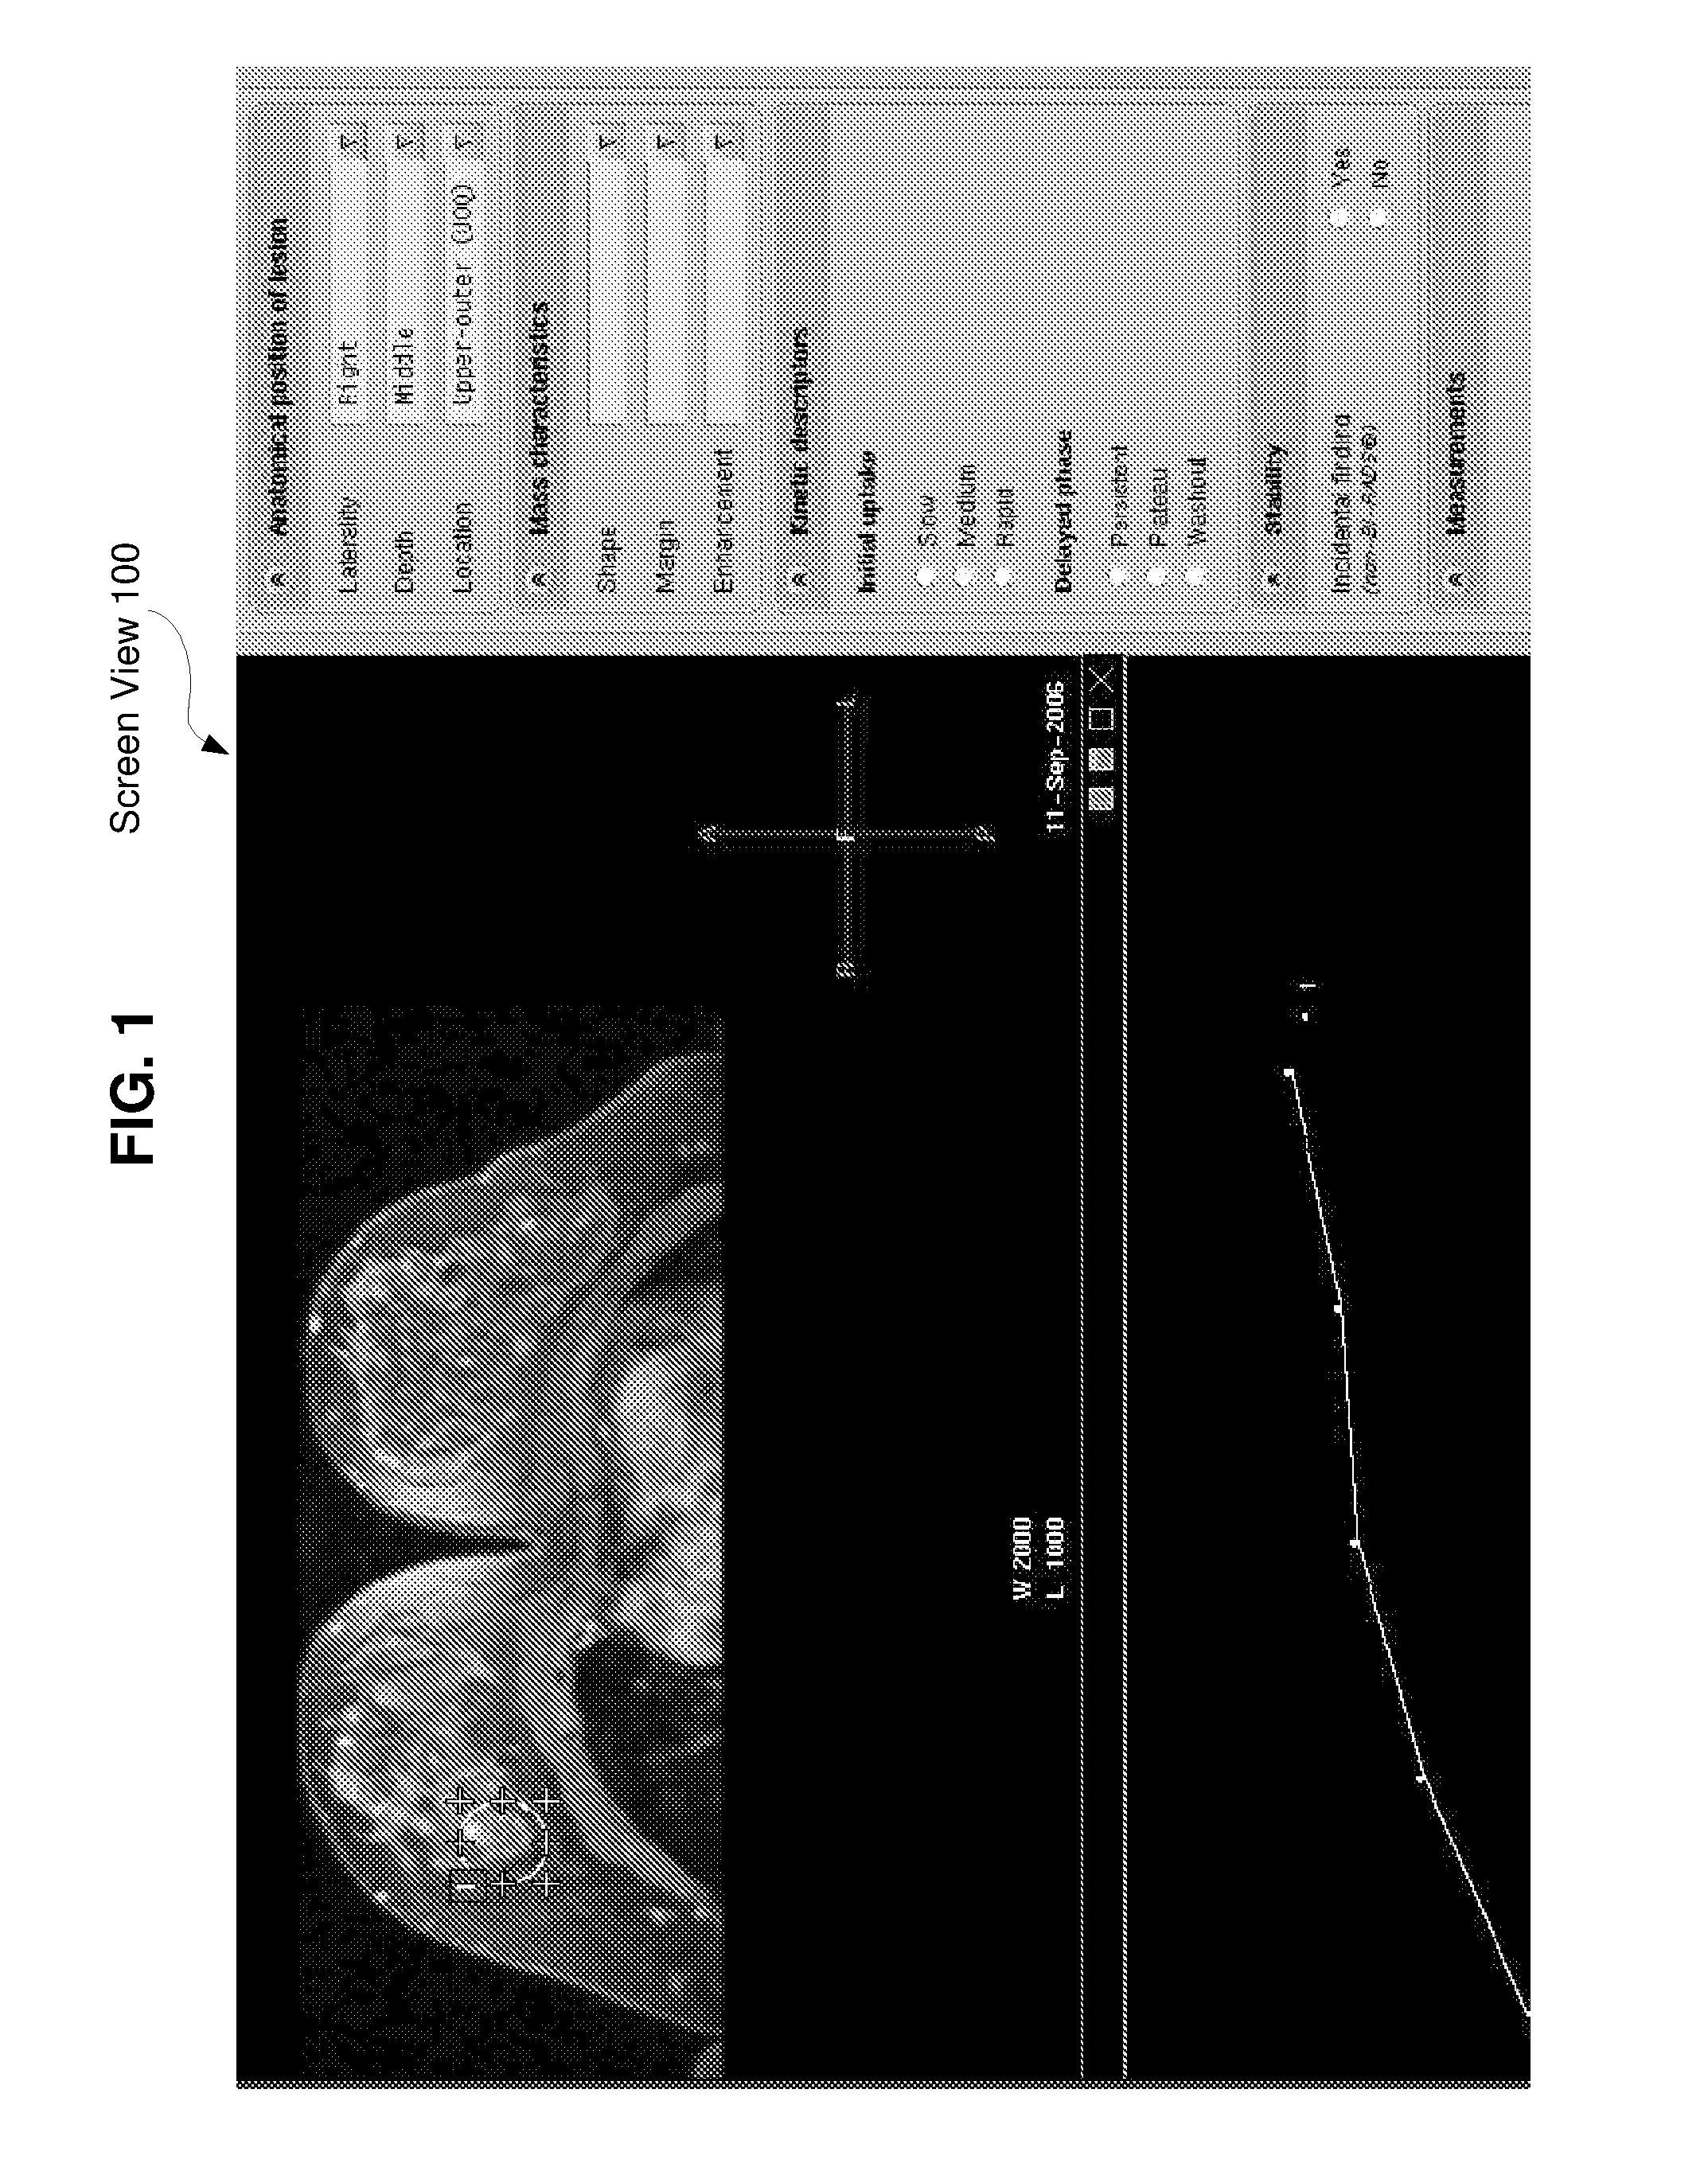 Method and system for intelligent linking of medical data